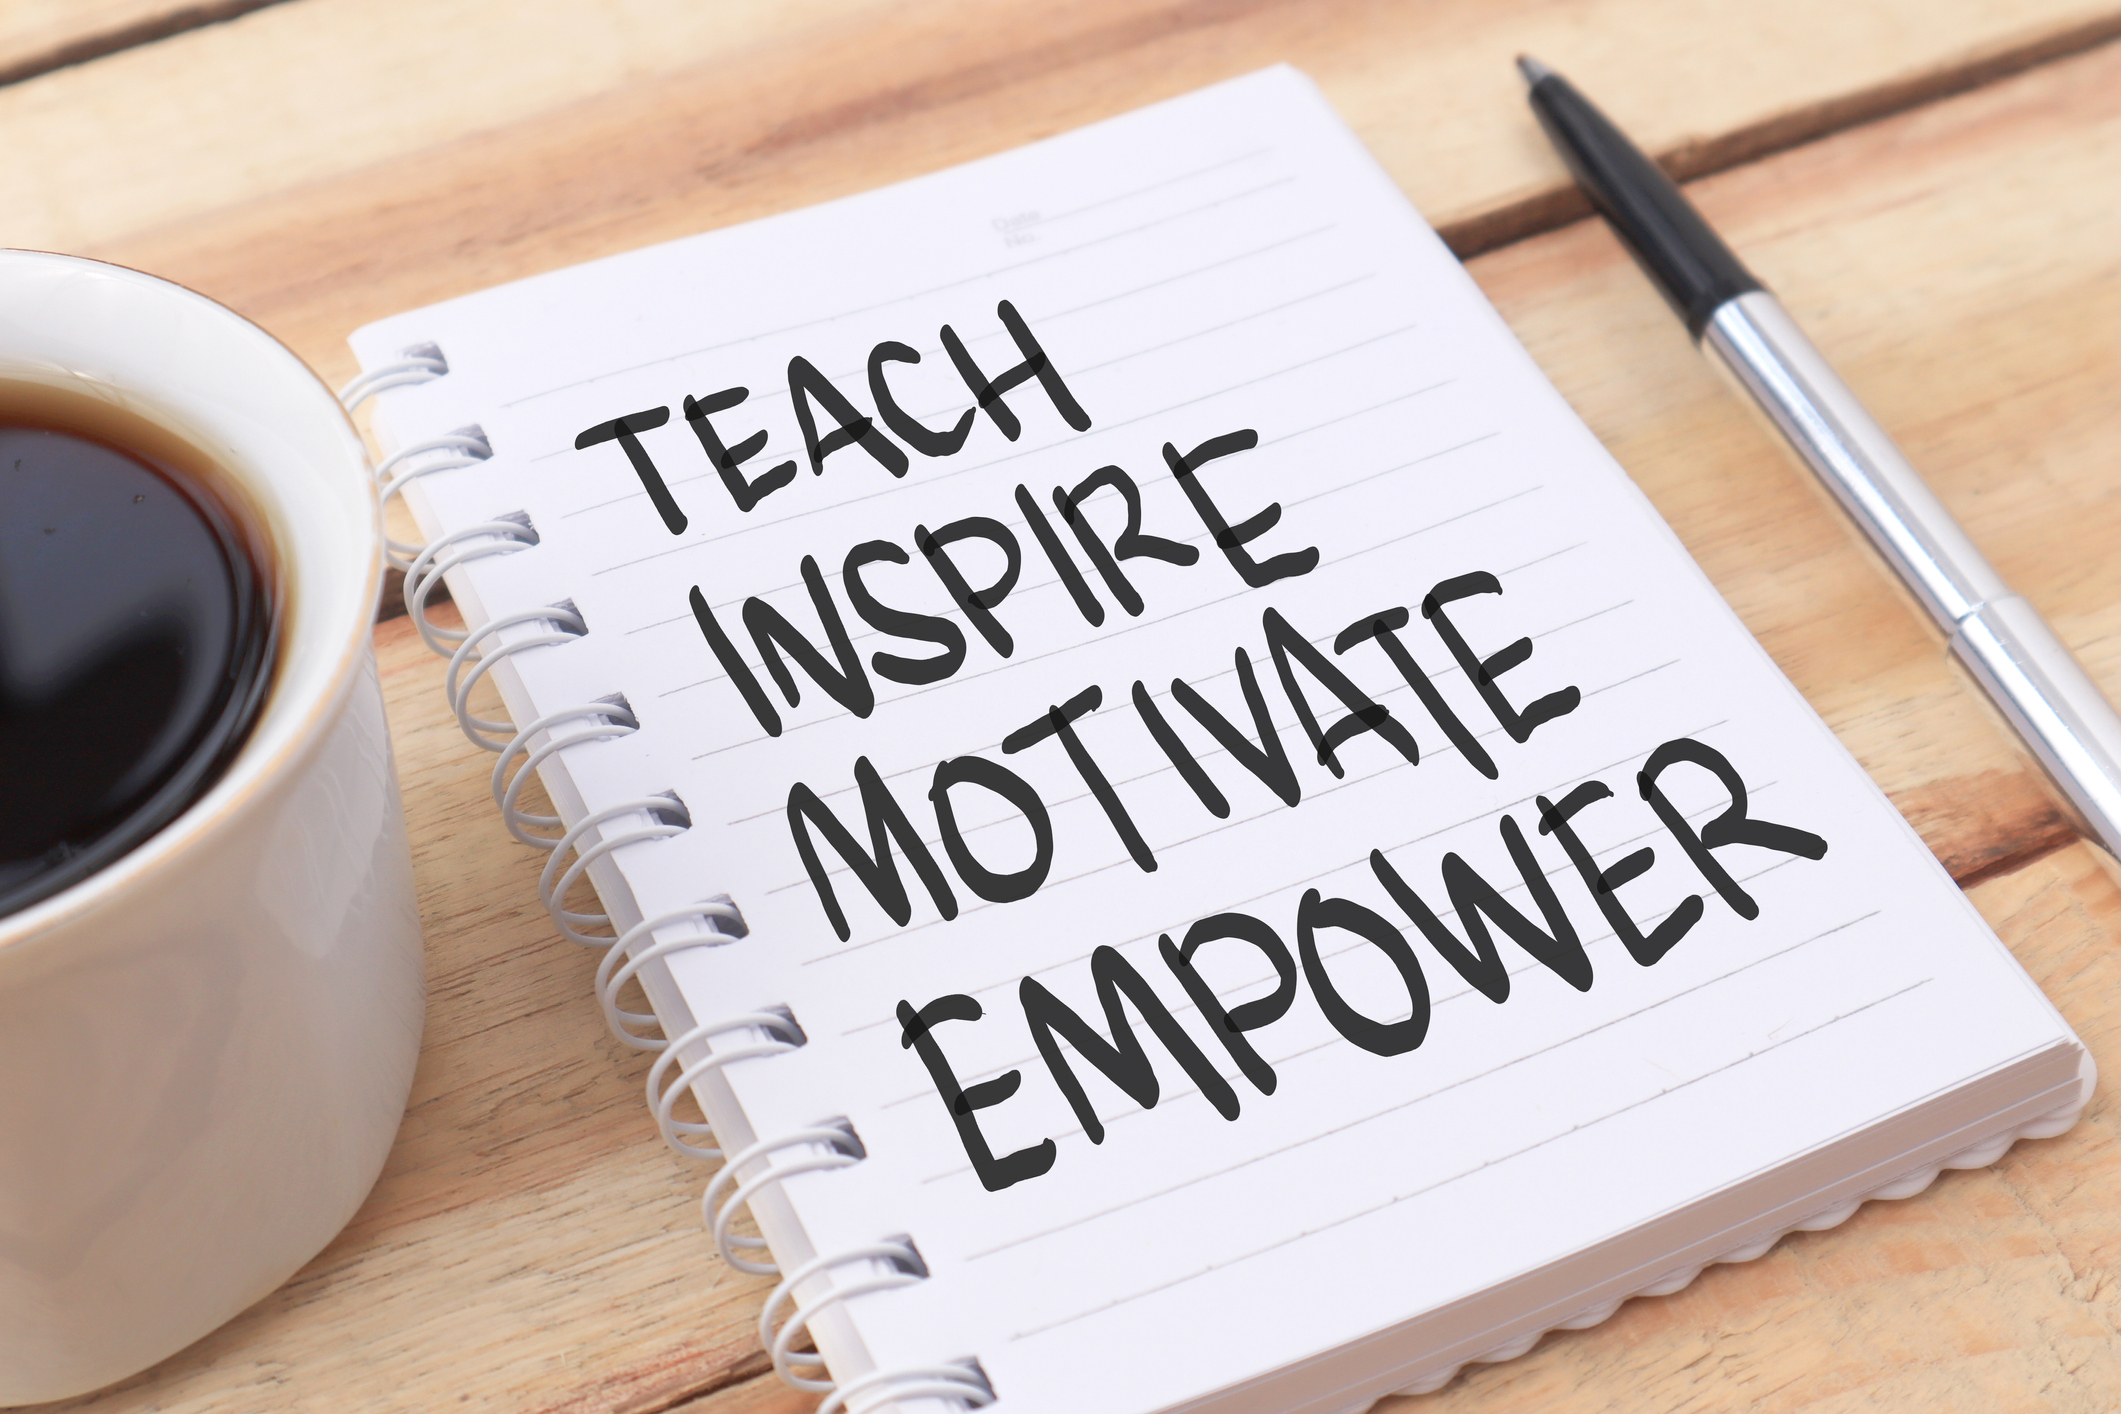 Photograph of a notebook with the text Teach Inspire Motivate Empower